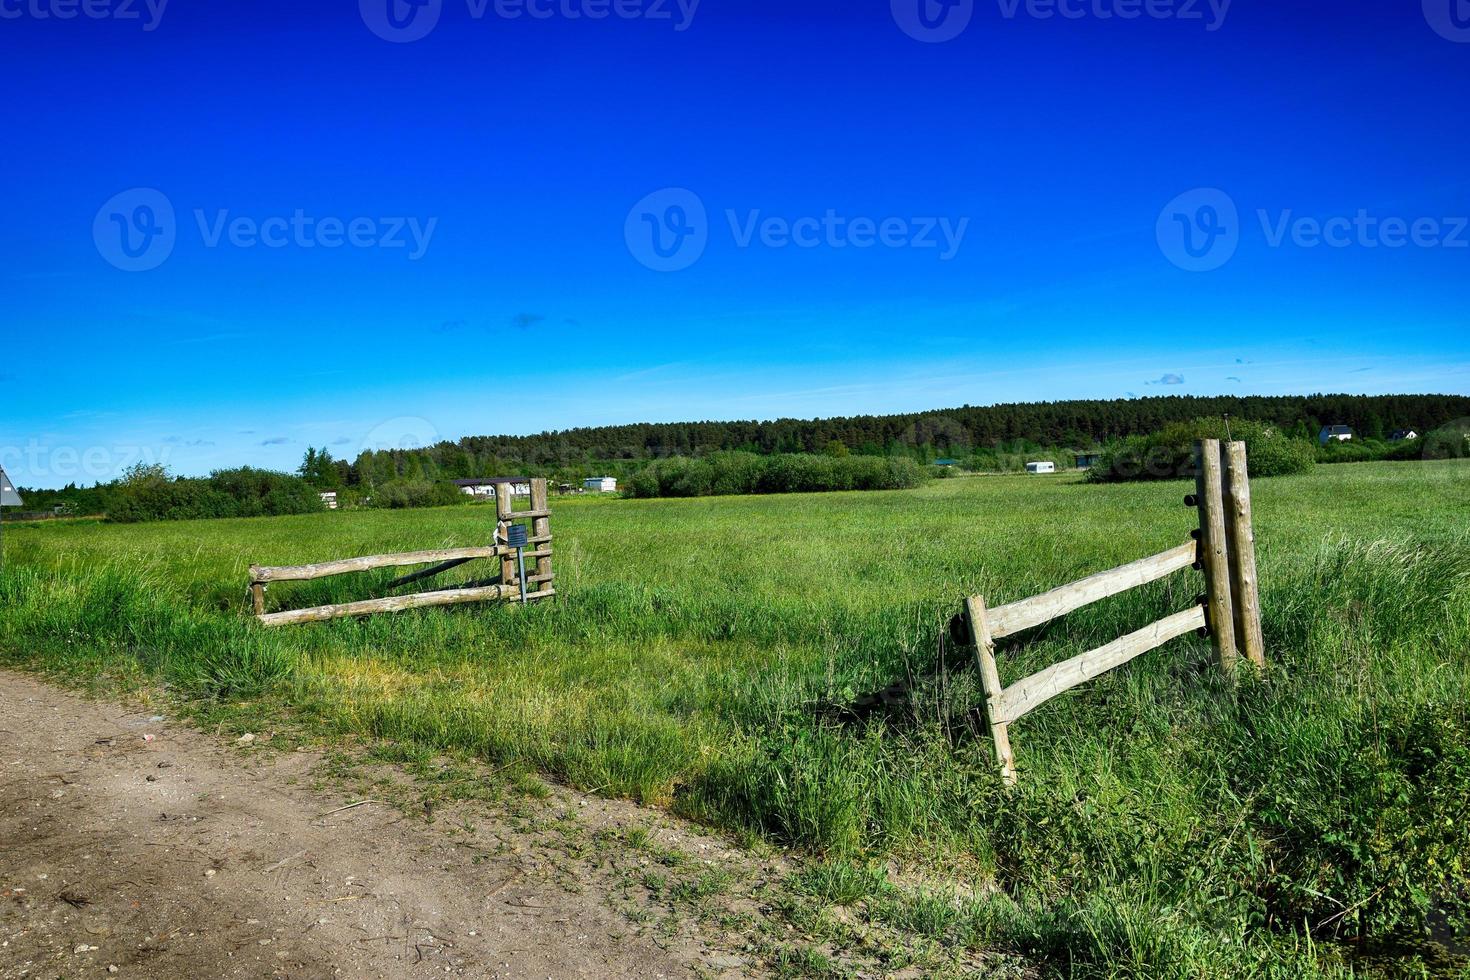 picturesque spring landscape with blue sky and green fields photo